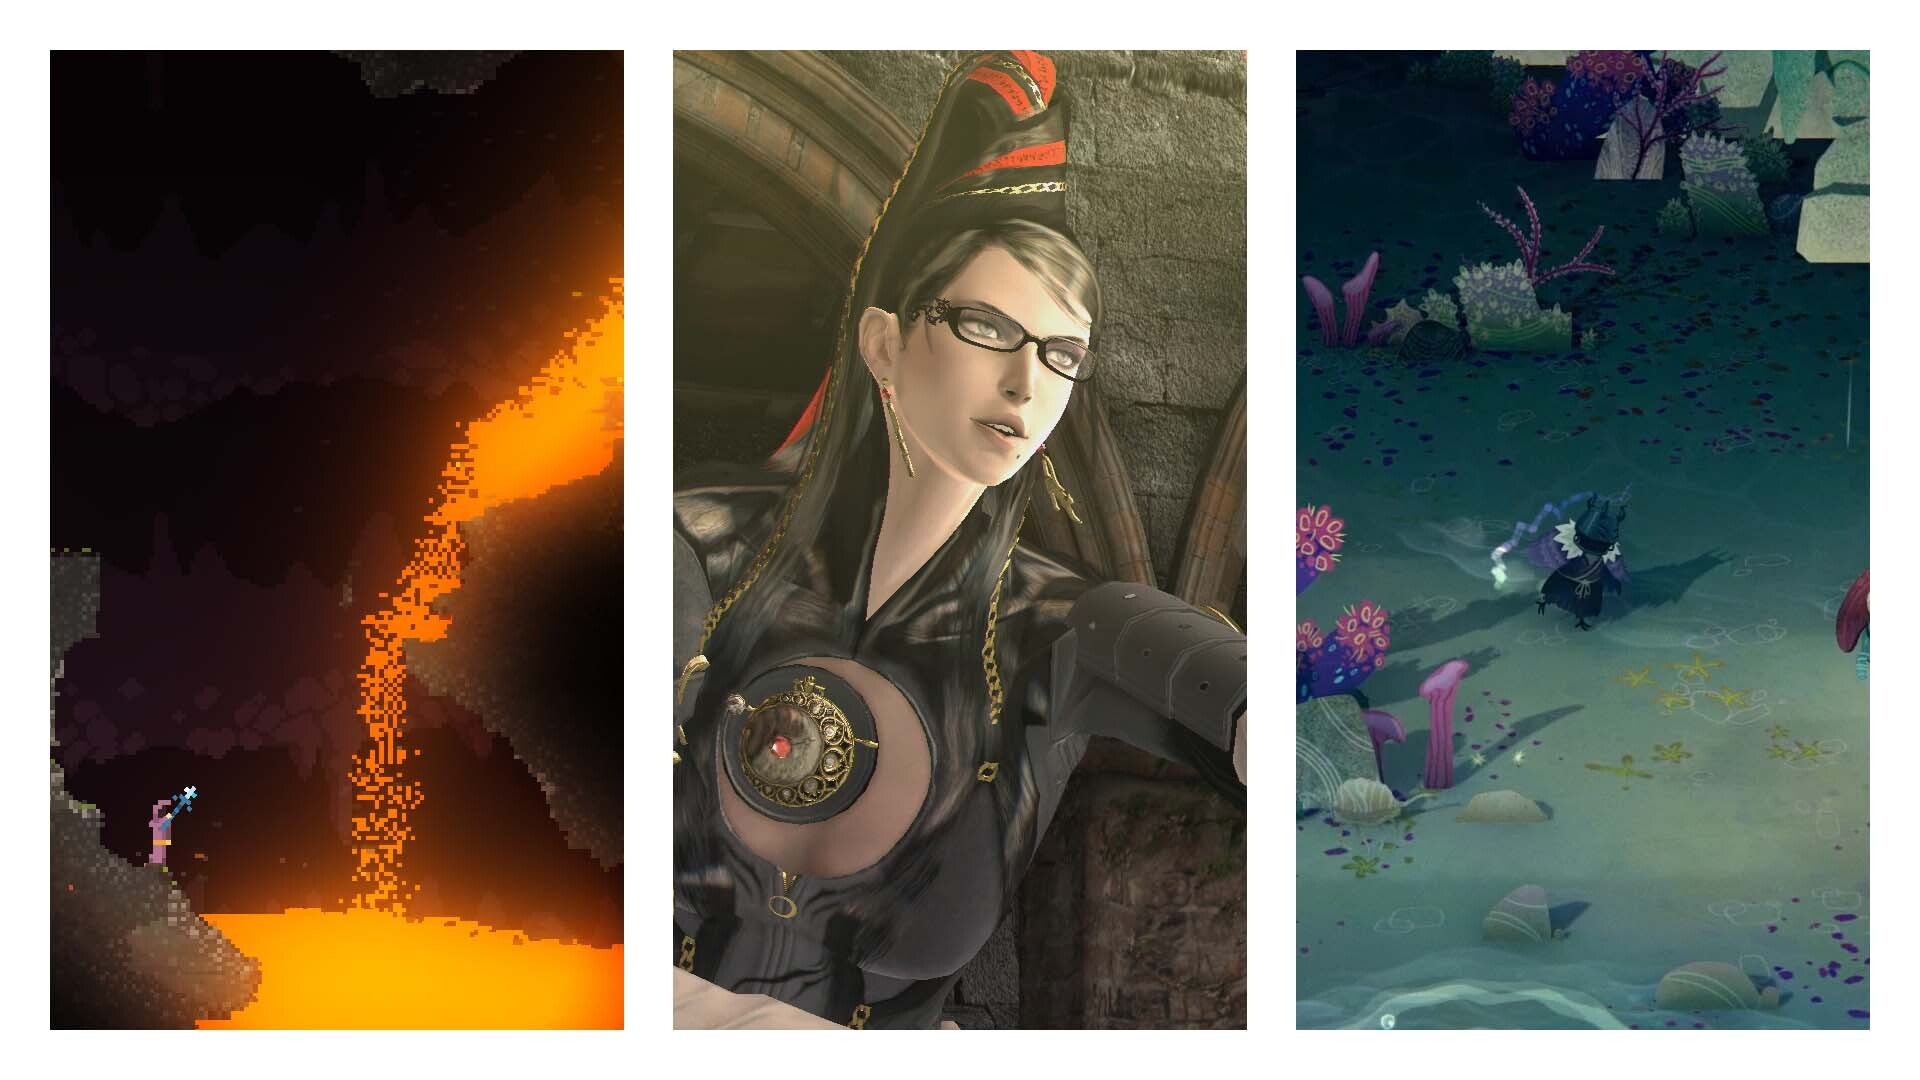 A composite image split into thirds. Left to right: a screen from Noita showing lava tumbling towards the witch, Bayonetta from Bayonetta, and the witch in Wytchwood ambling around the swamp